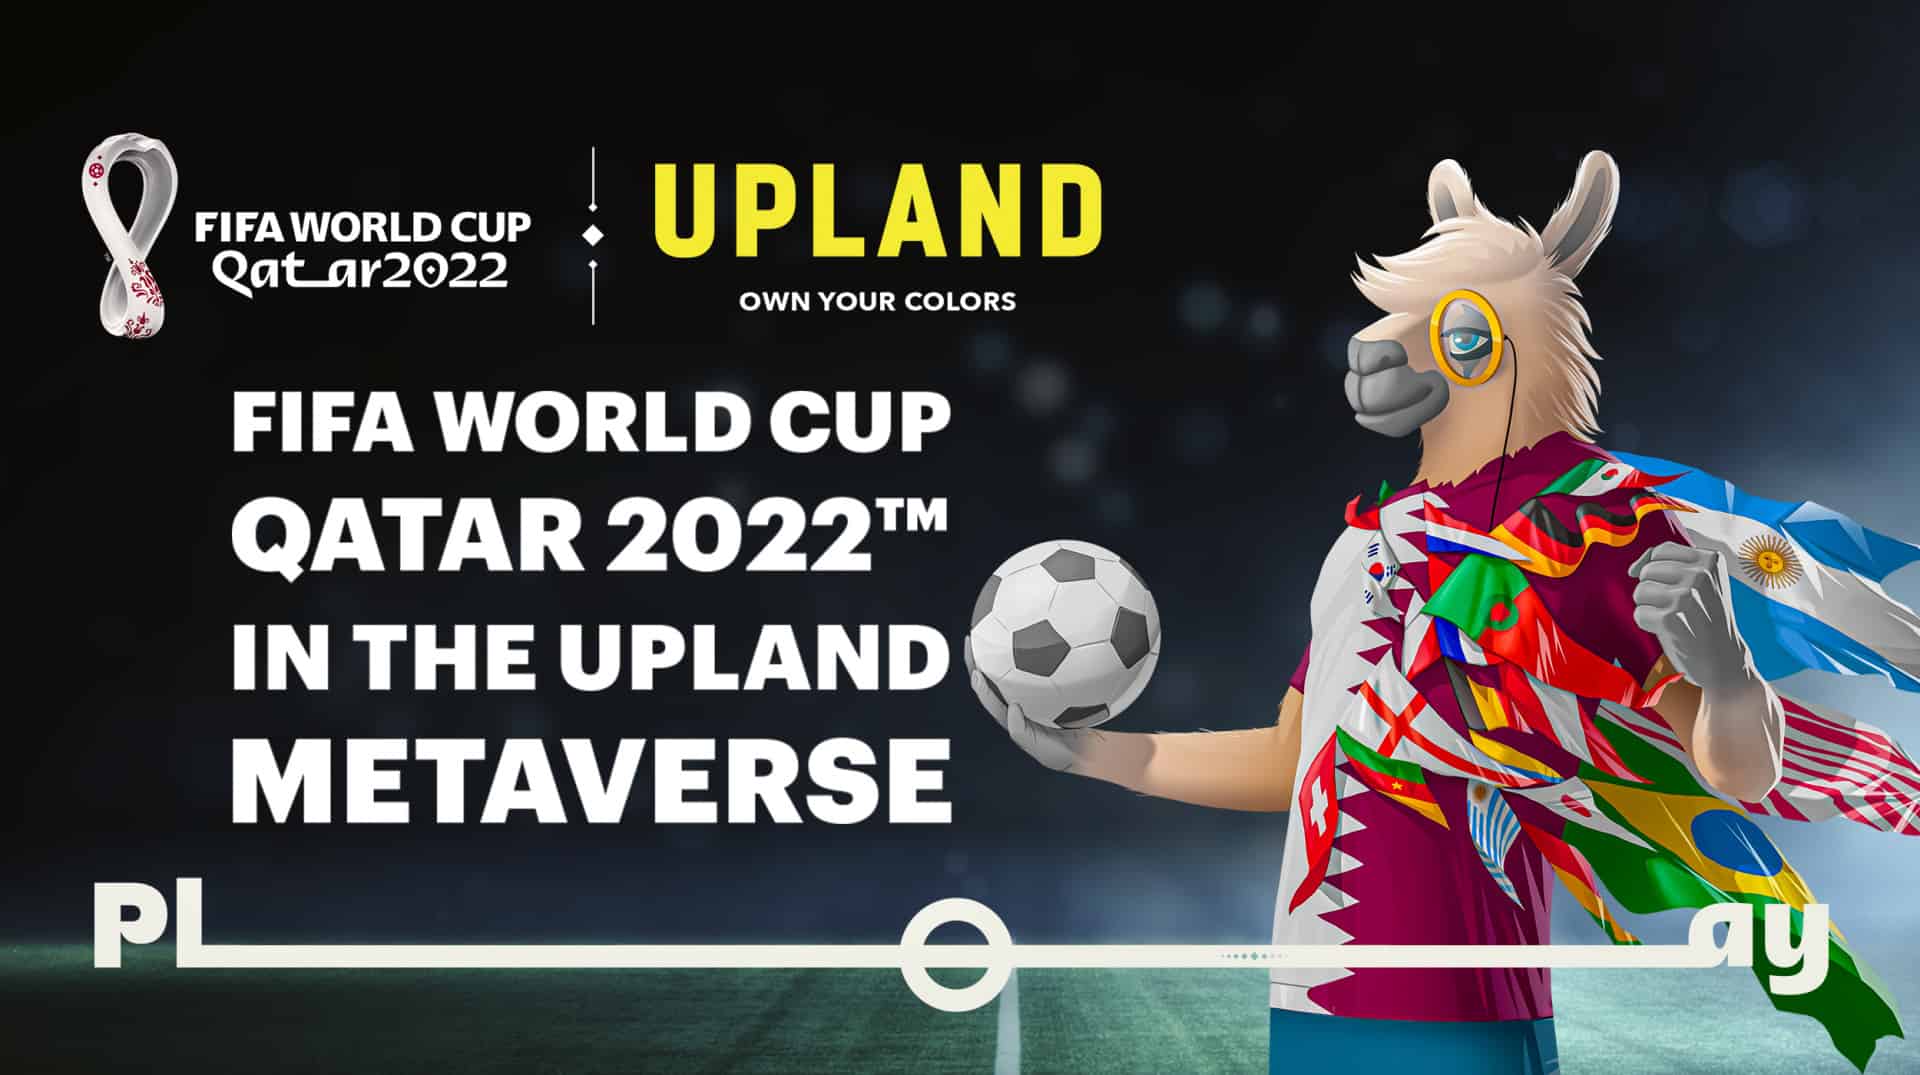 Upland and FIFA Officially Launch the FIFA World Cup Qatar 2022 Metaverse Experience